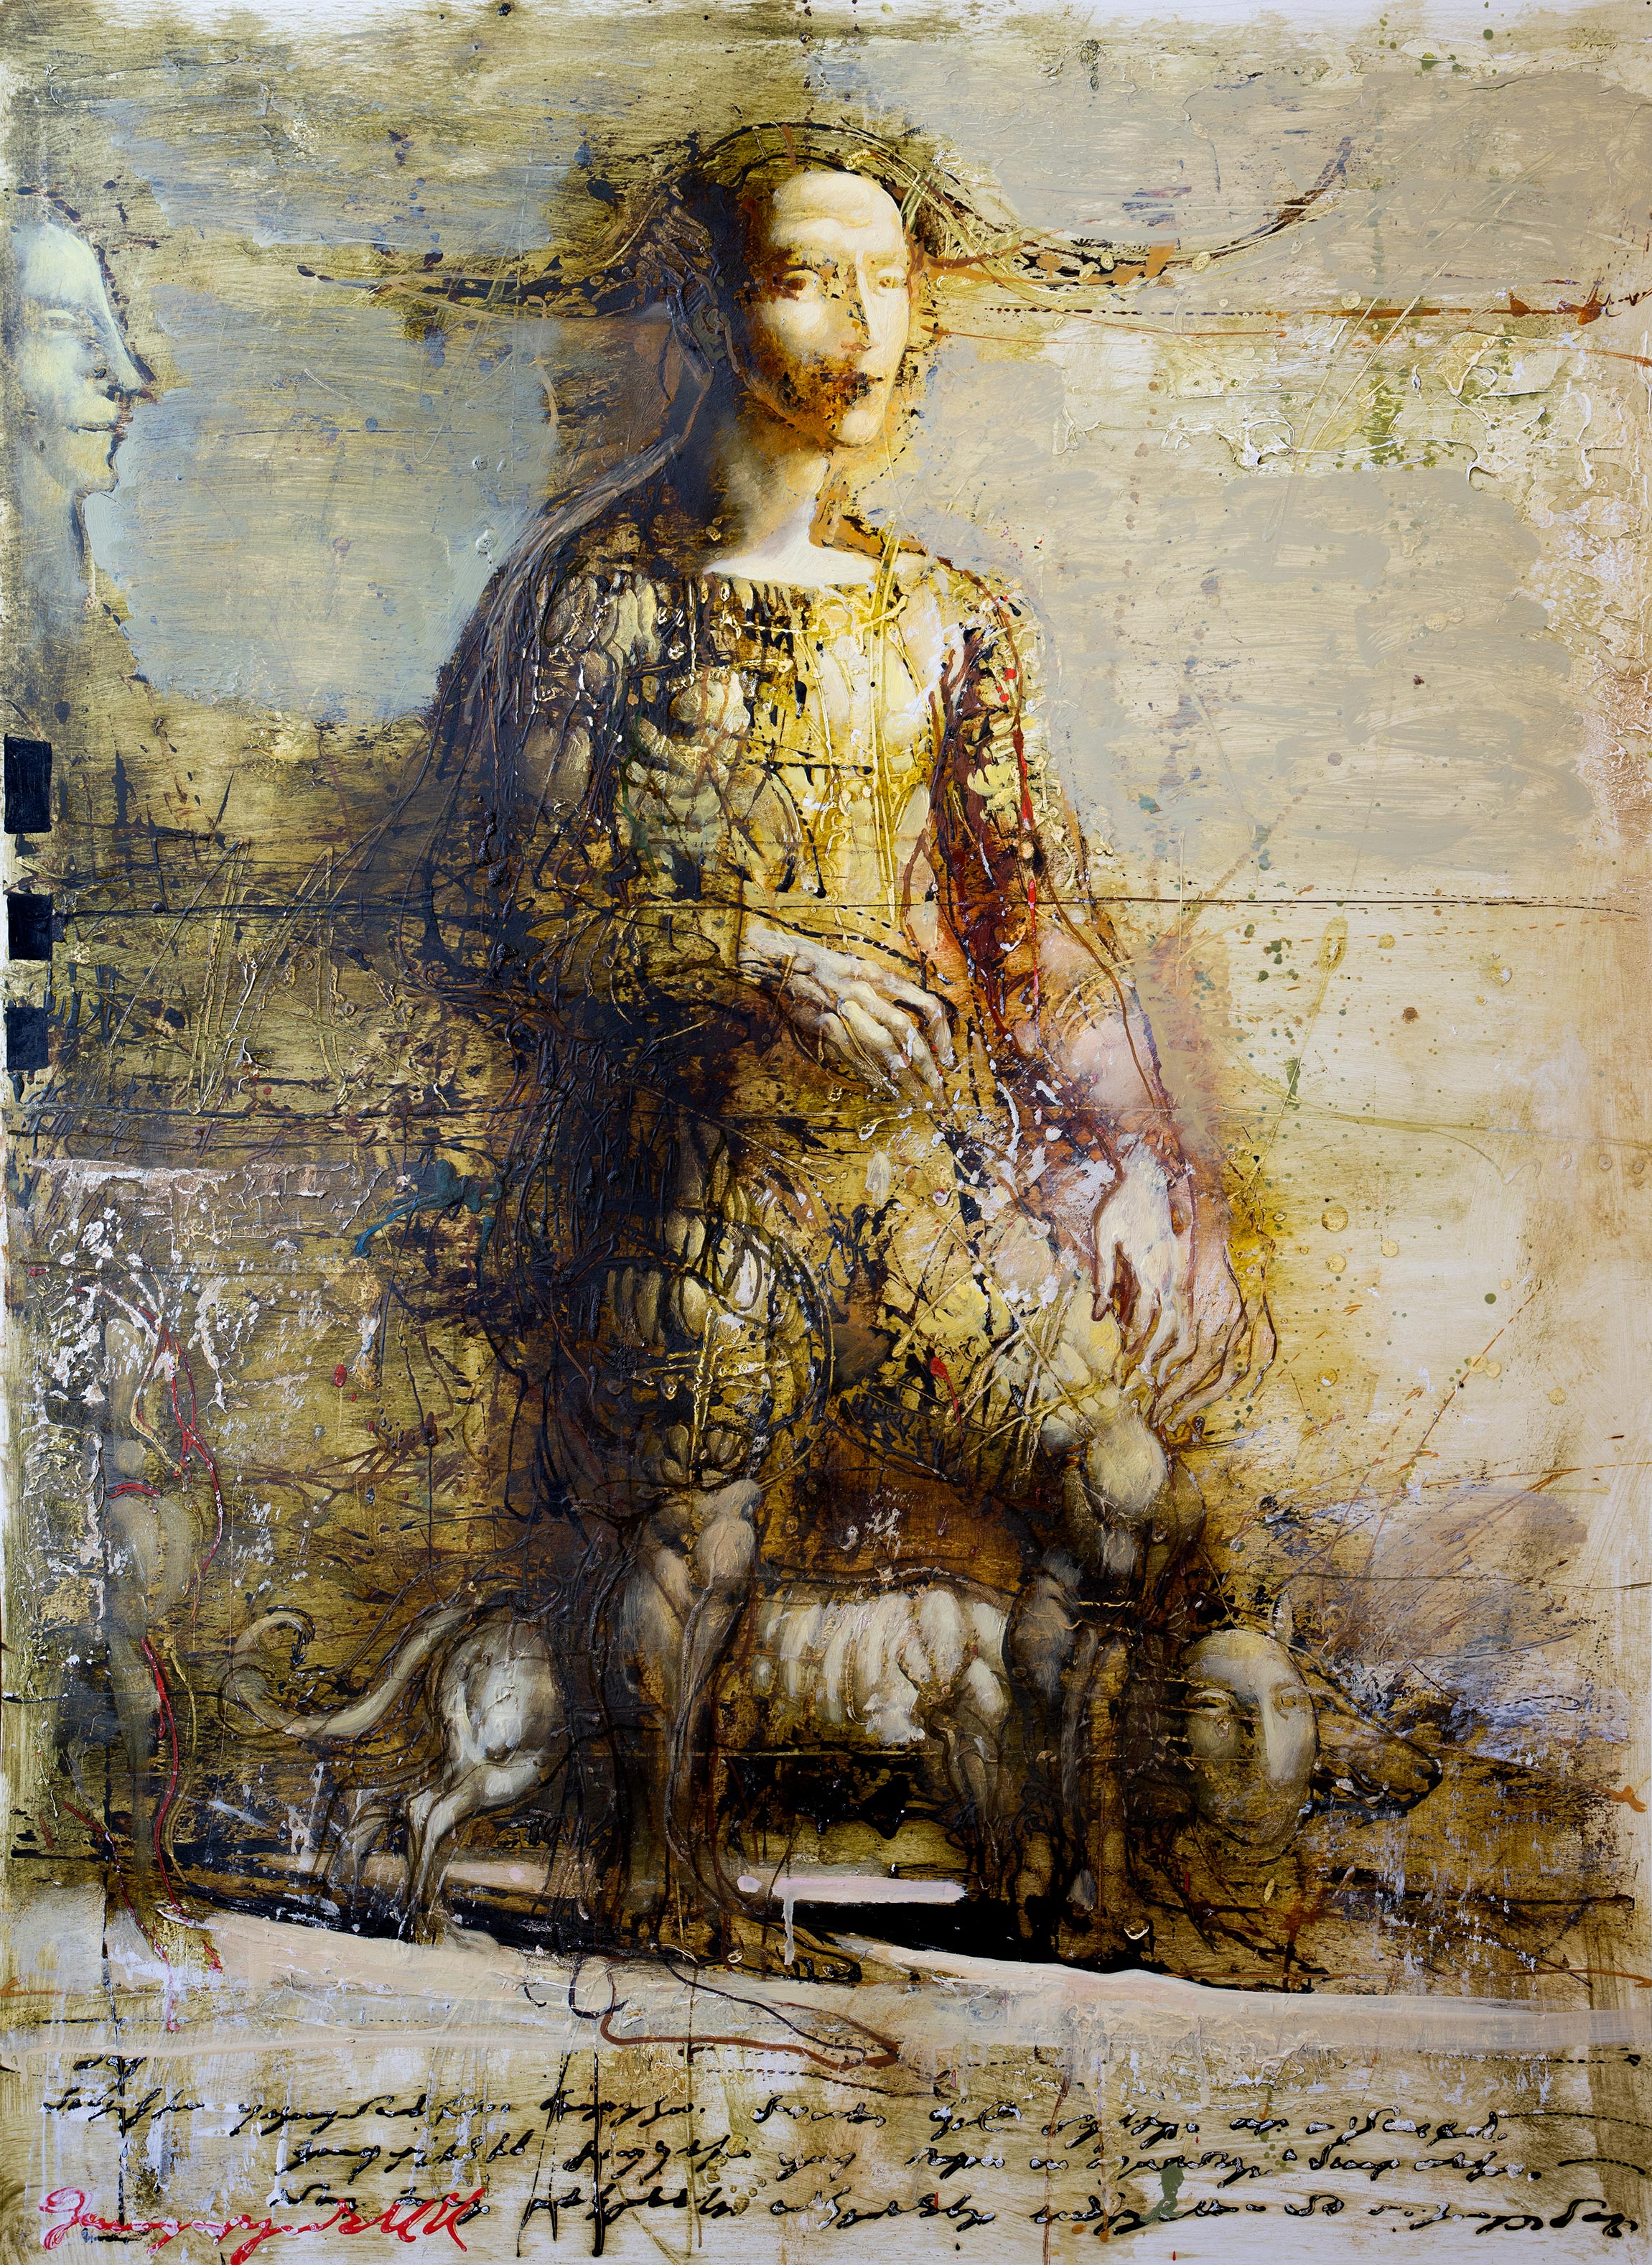 Man with the Dog, Armen Gasparyan, Buy the painting Mixed media